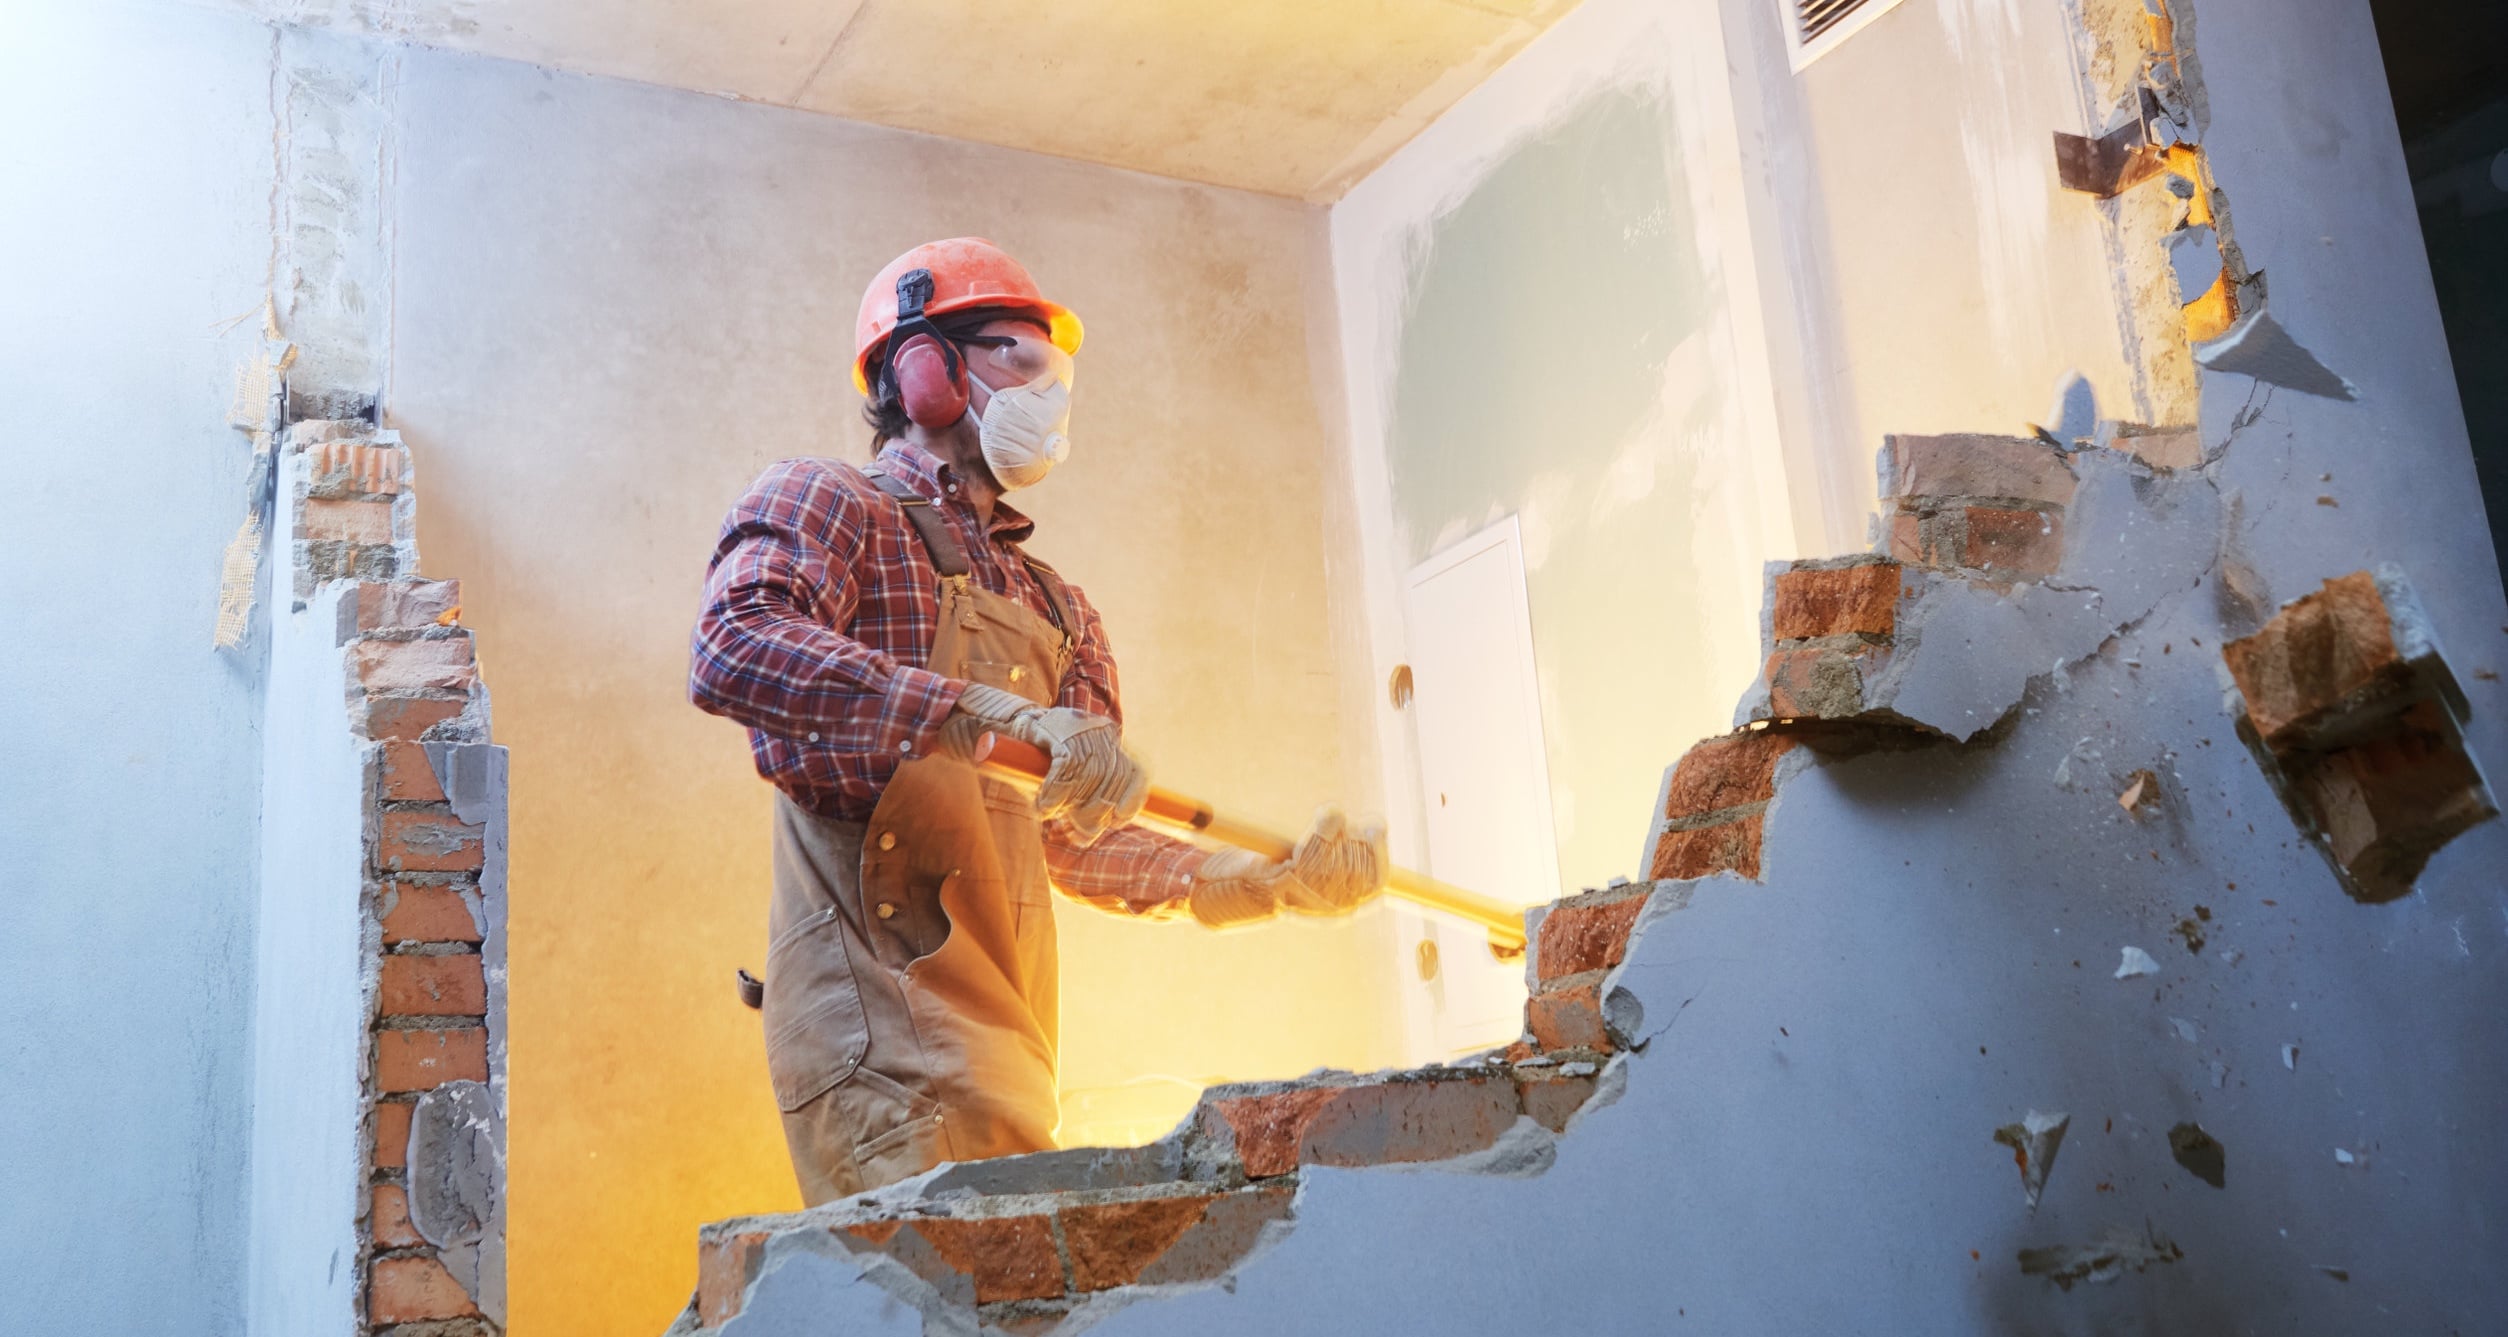 Man demolishing a wall in a home with sledgehammer